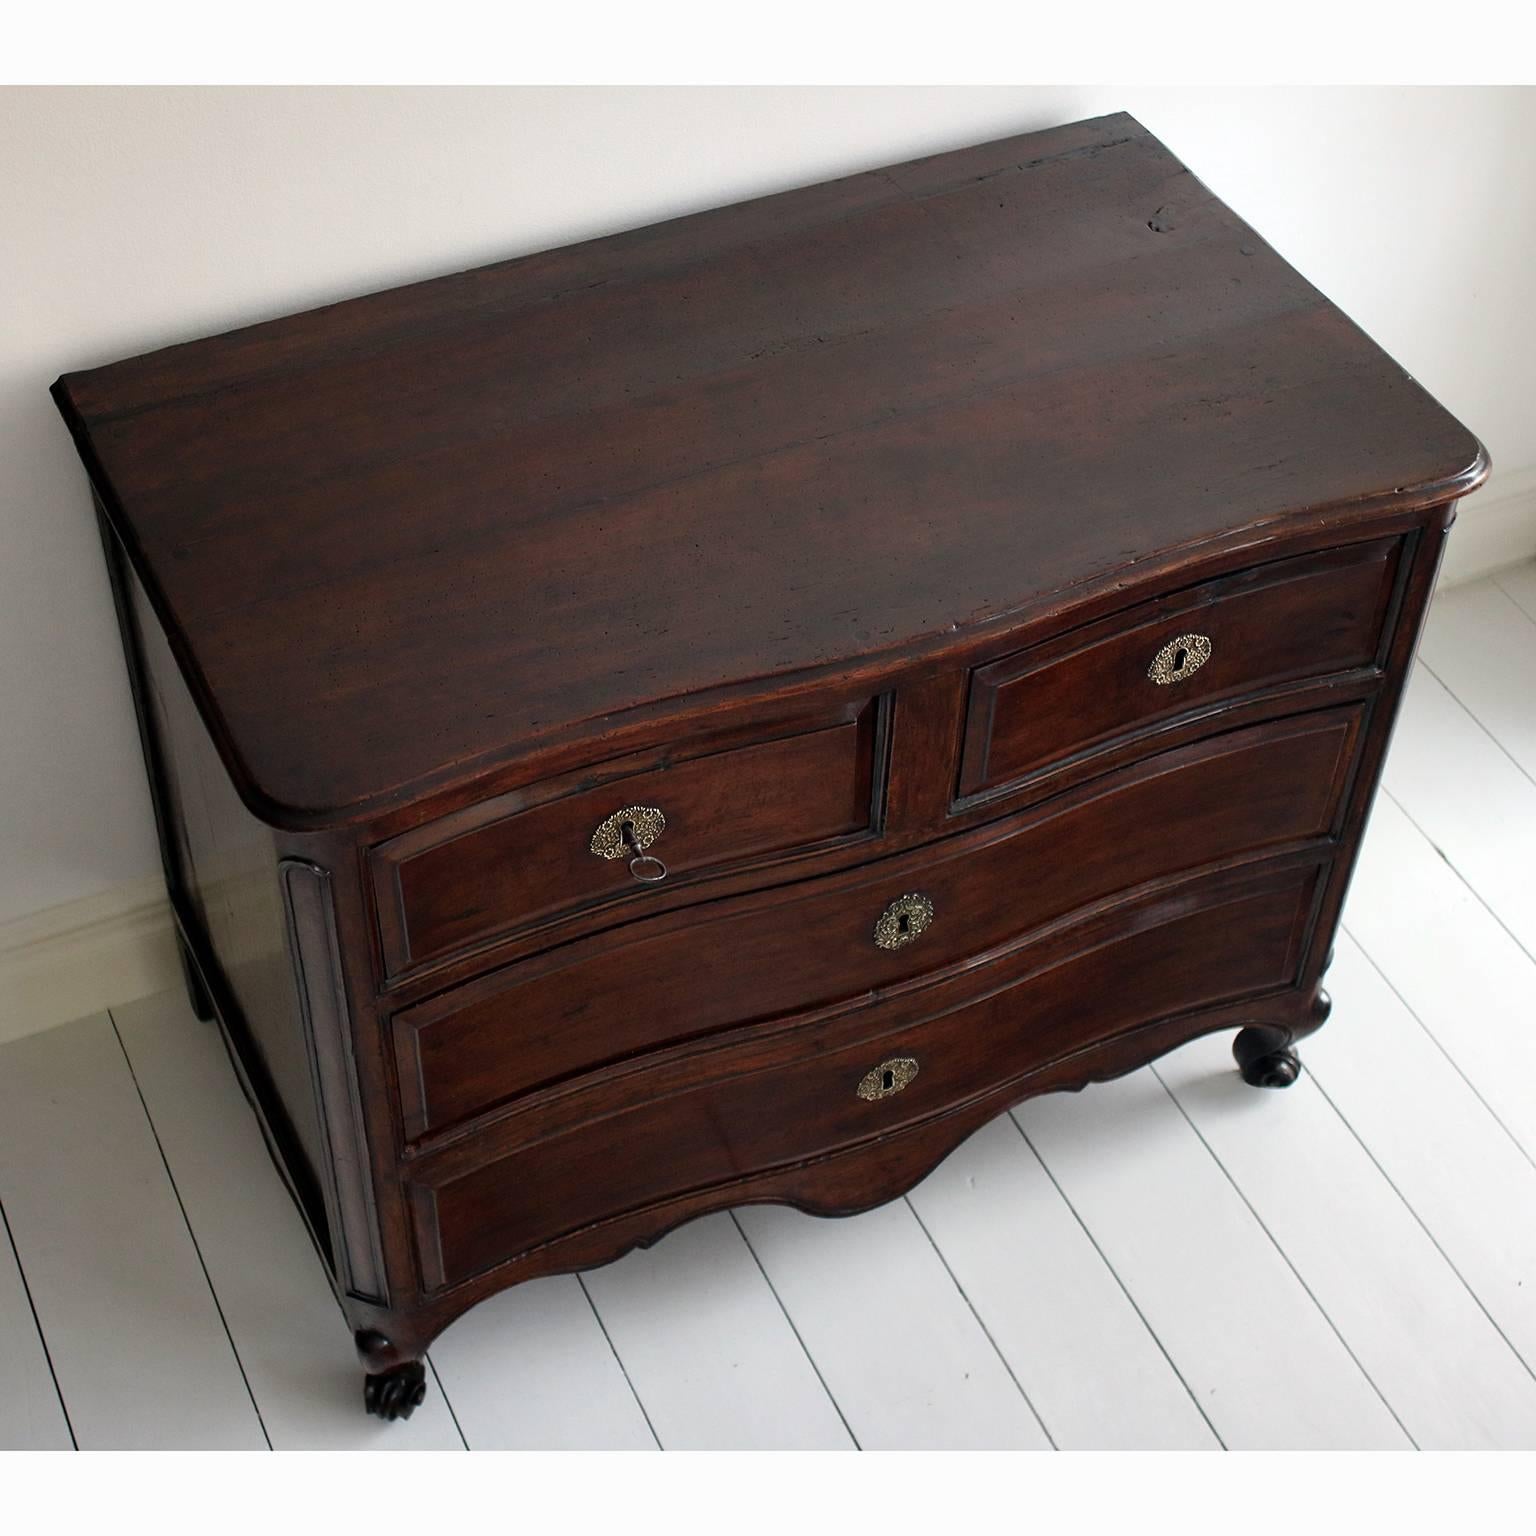 A French walnut commode with original escutcheons, locks and key. The commode is a beautiful rich colour and in excellent condition. 